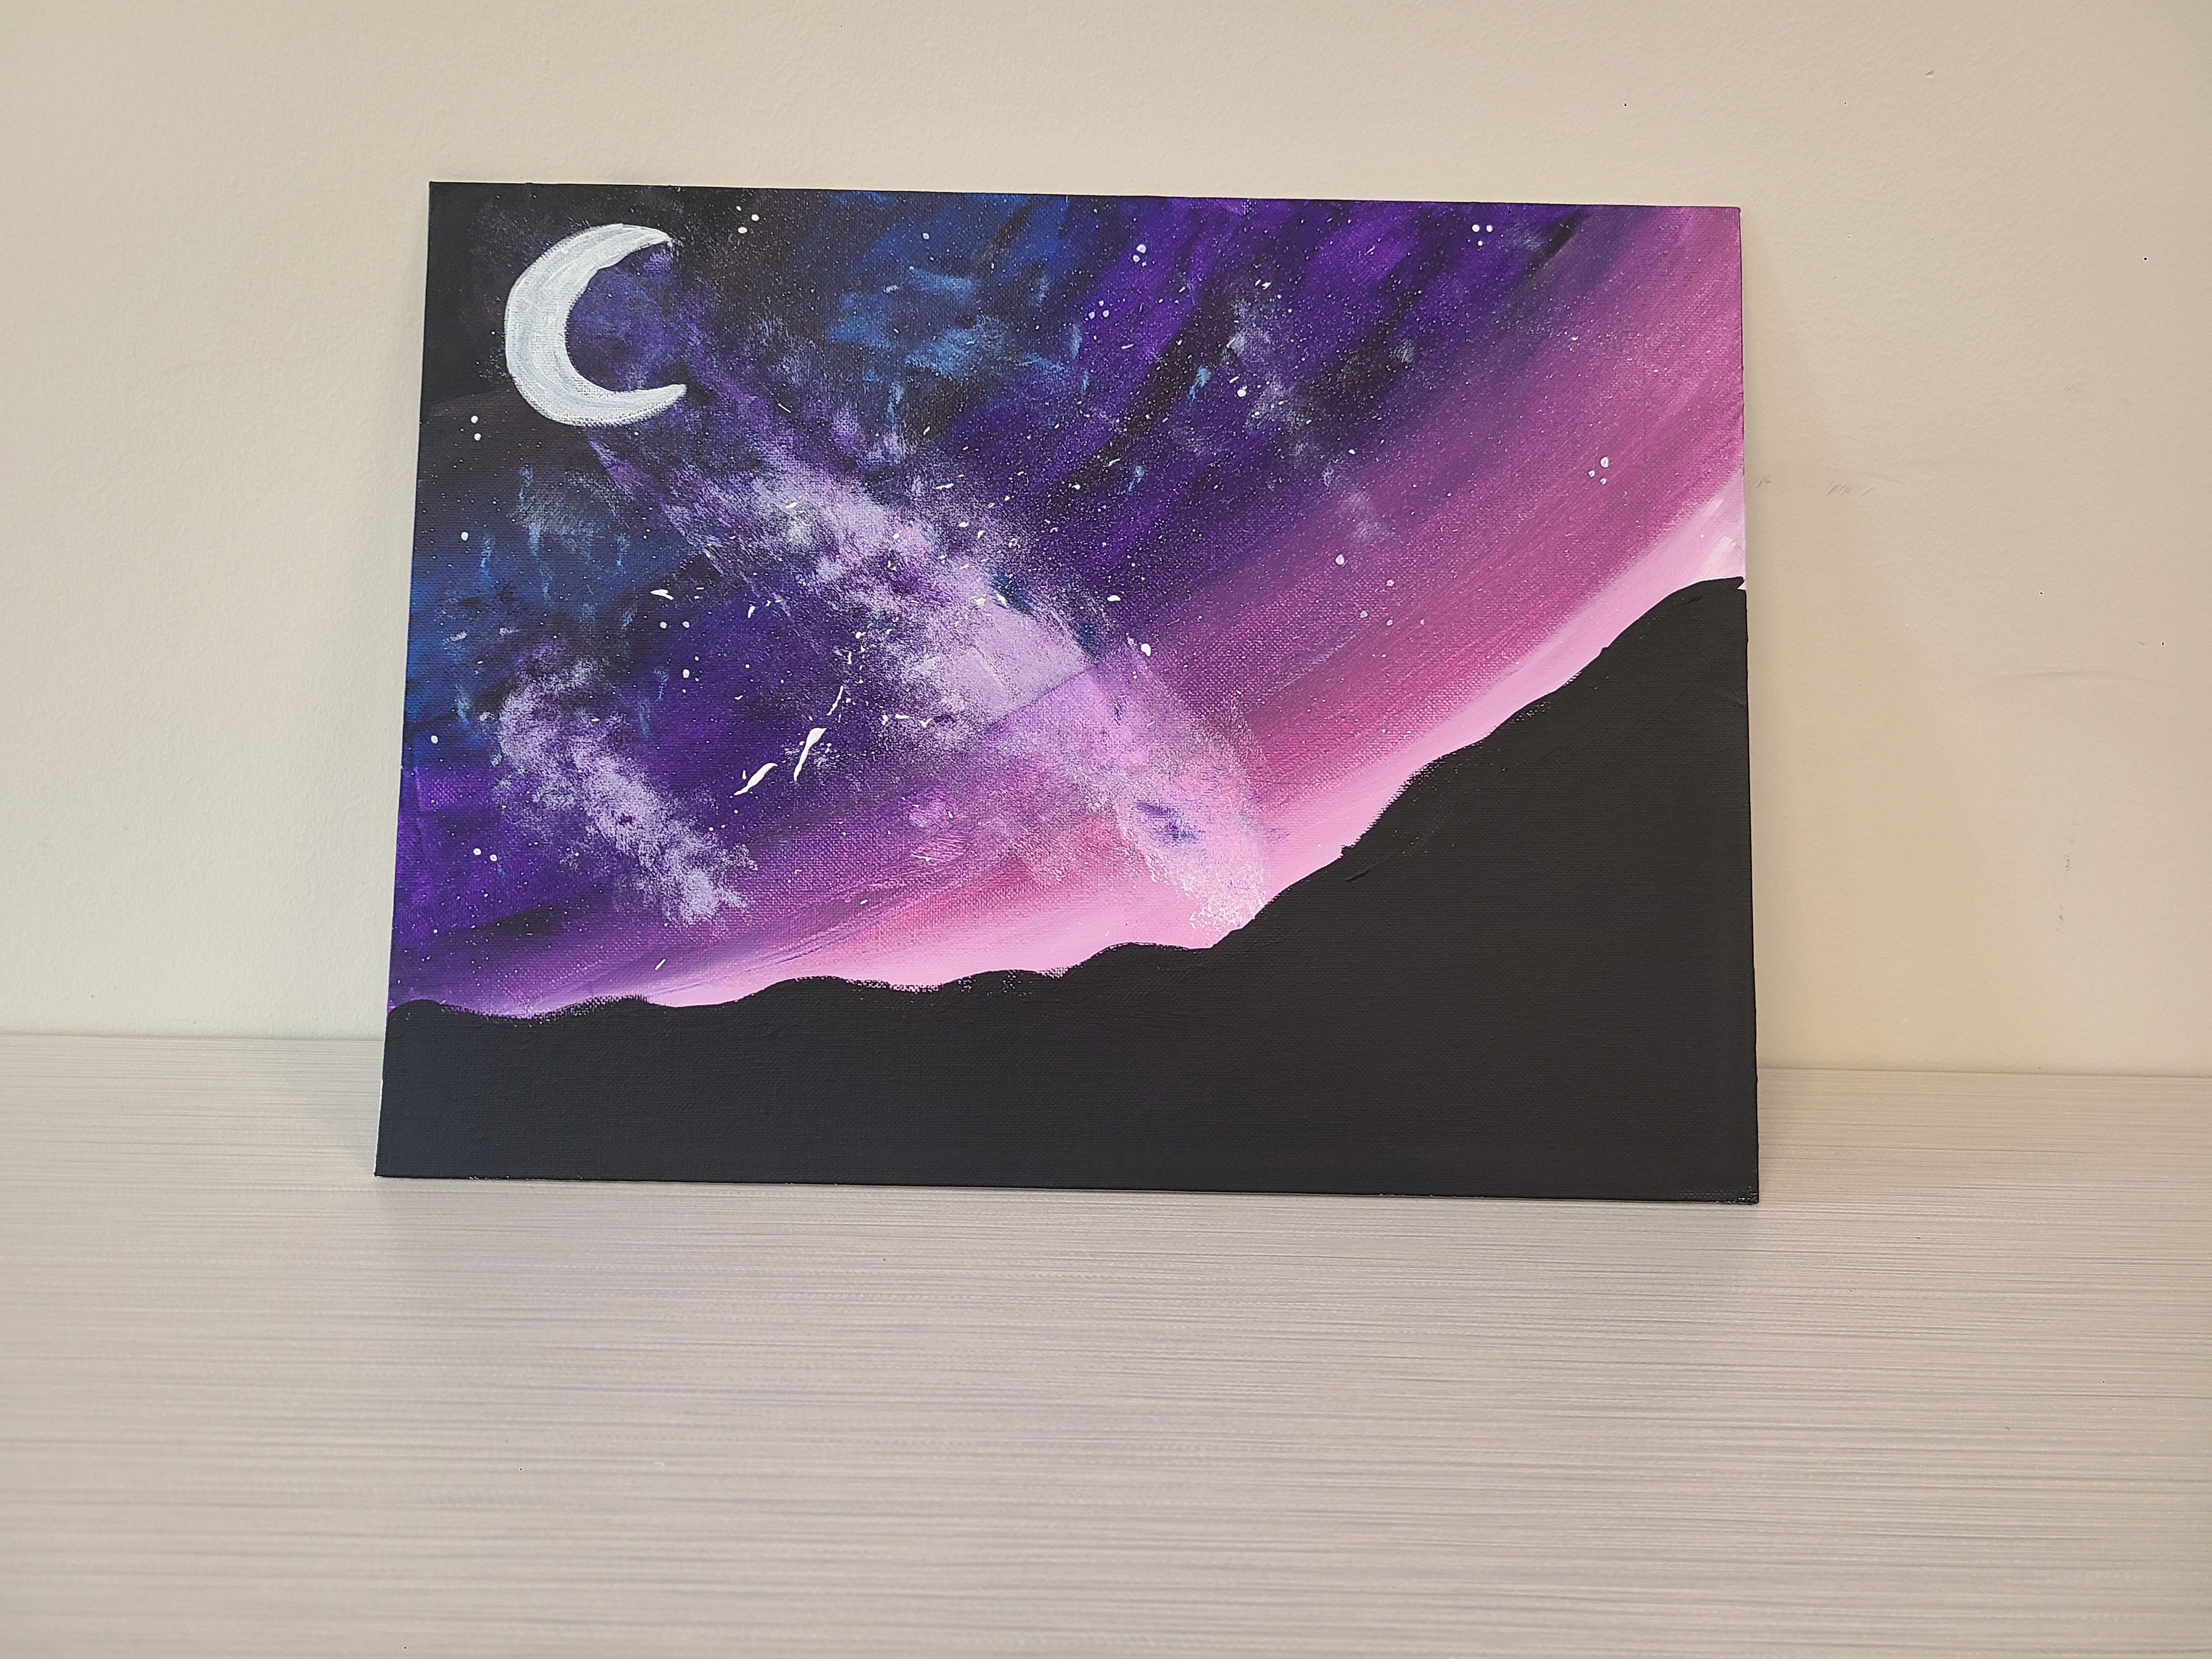 Night sky scene in black, blue, purple and pink with white crescent moon